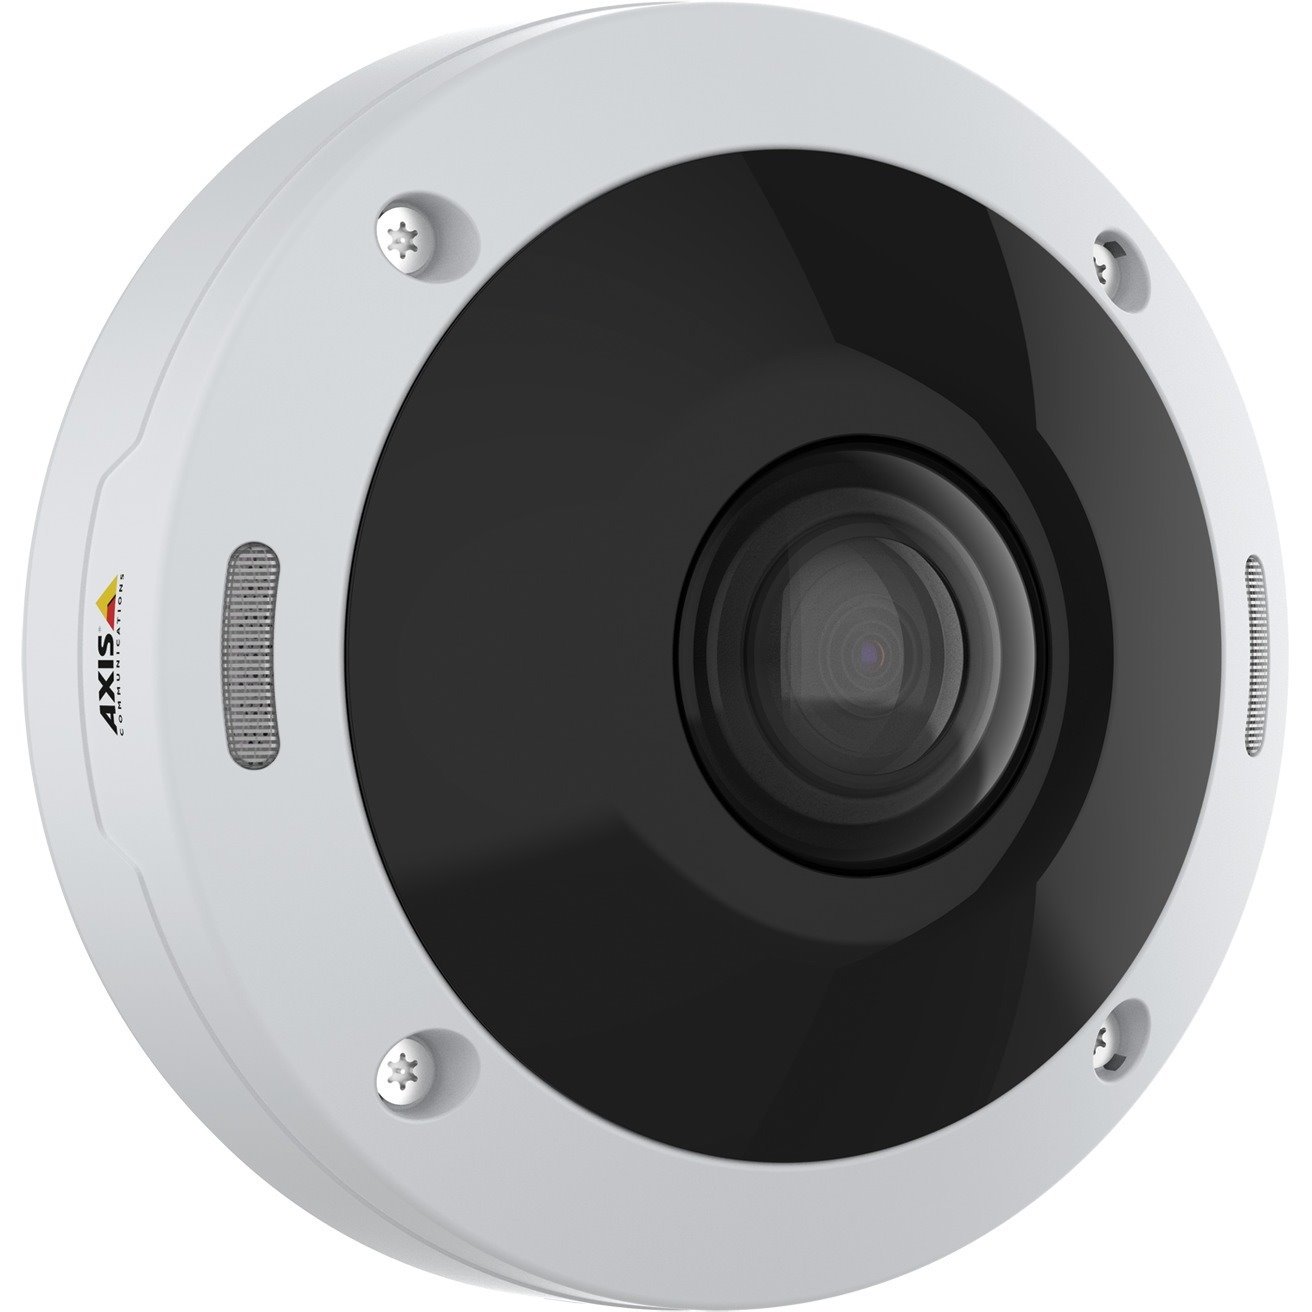 AXIS M4308-PLE 12 Megapixel Outdoor Network Camera - Color - Dome - White